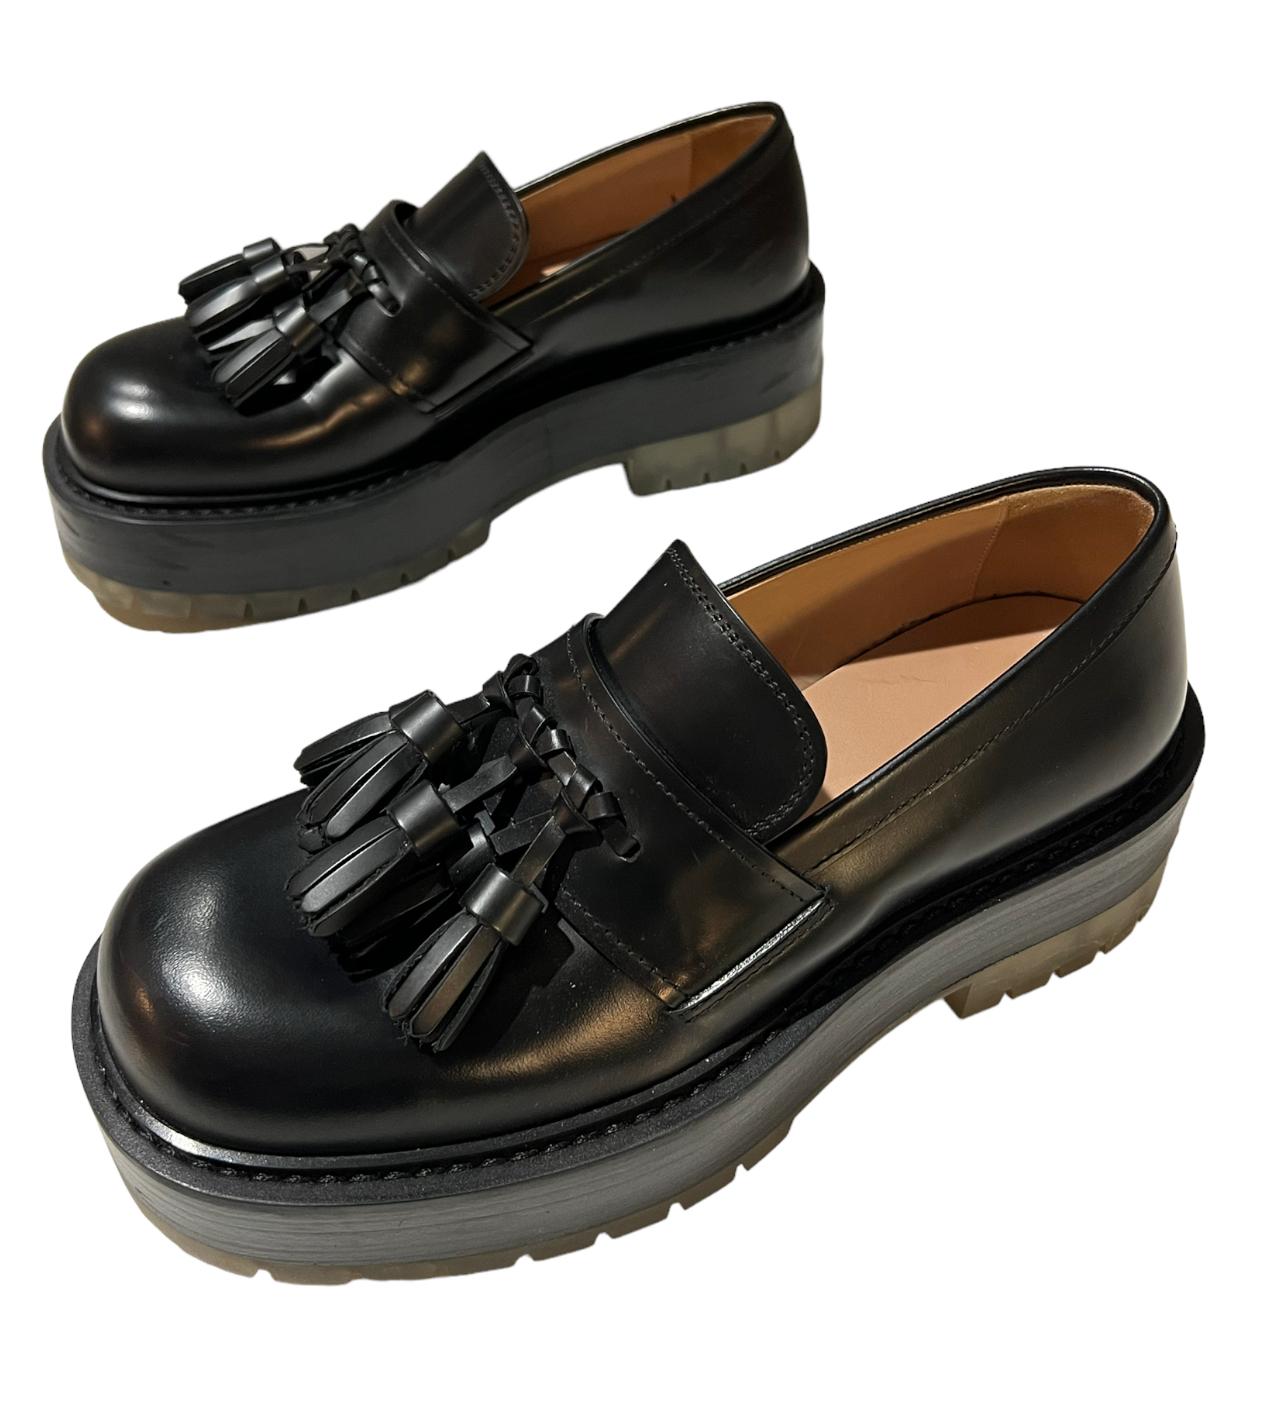 Bottega Veneta Black Leather Loafer Shoes, Size 40 In Good Condition For Sale In Beverly Hills, CA